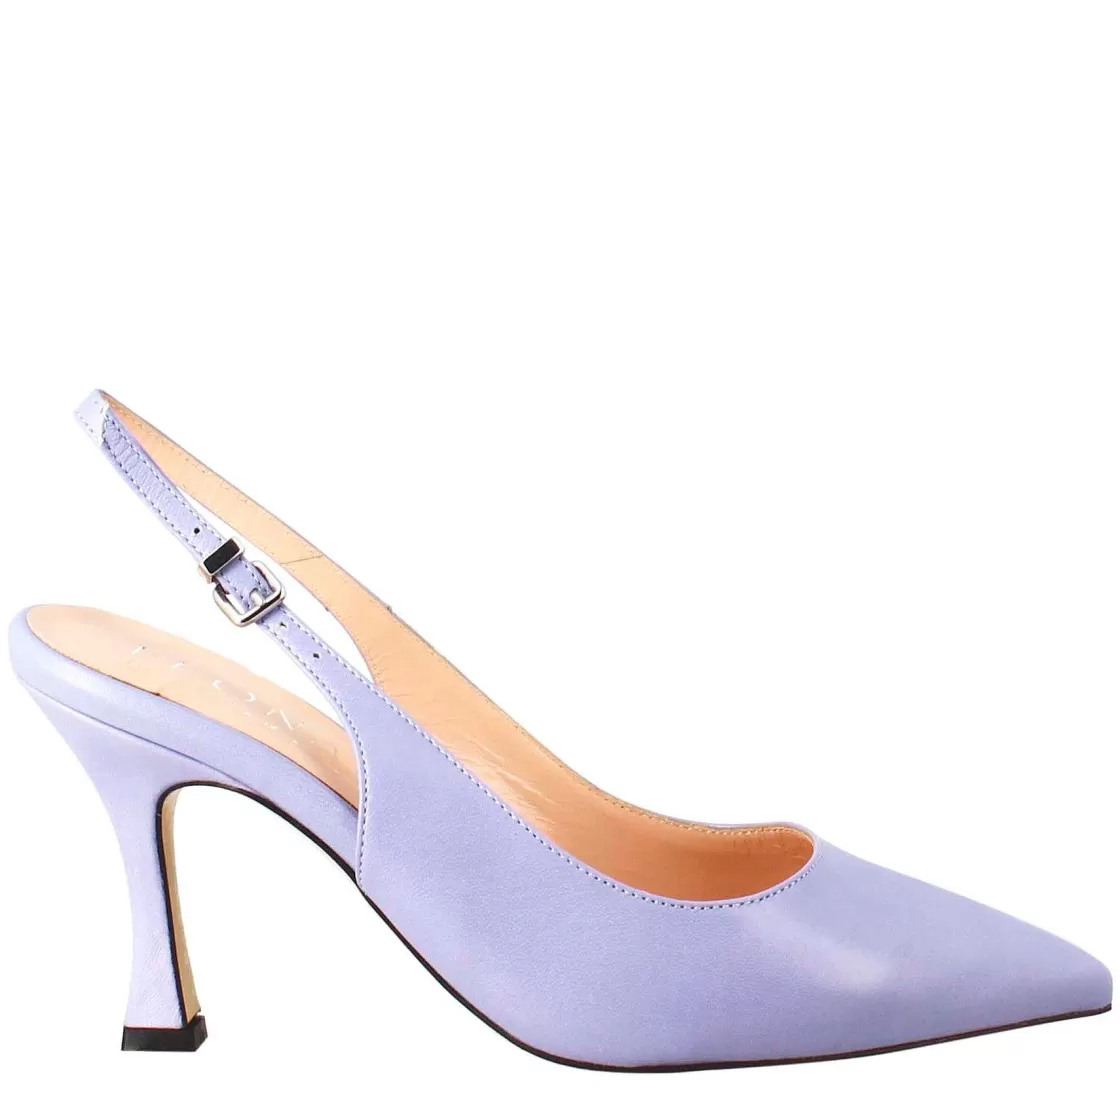 Leonardo Decollete With High Heels For Woman In Wisteria Color Leather Sale